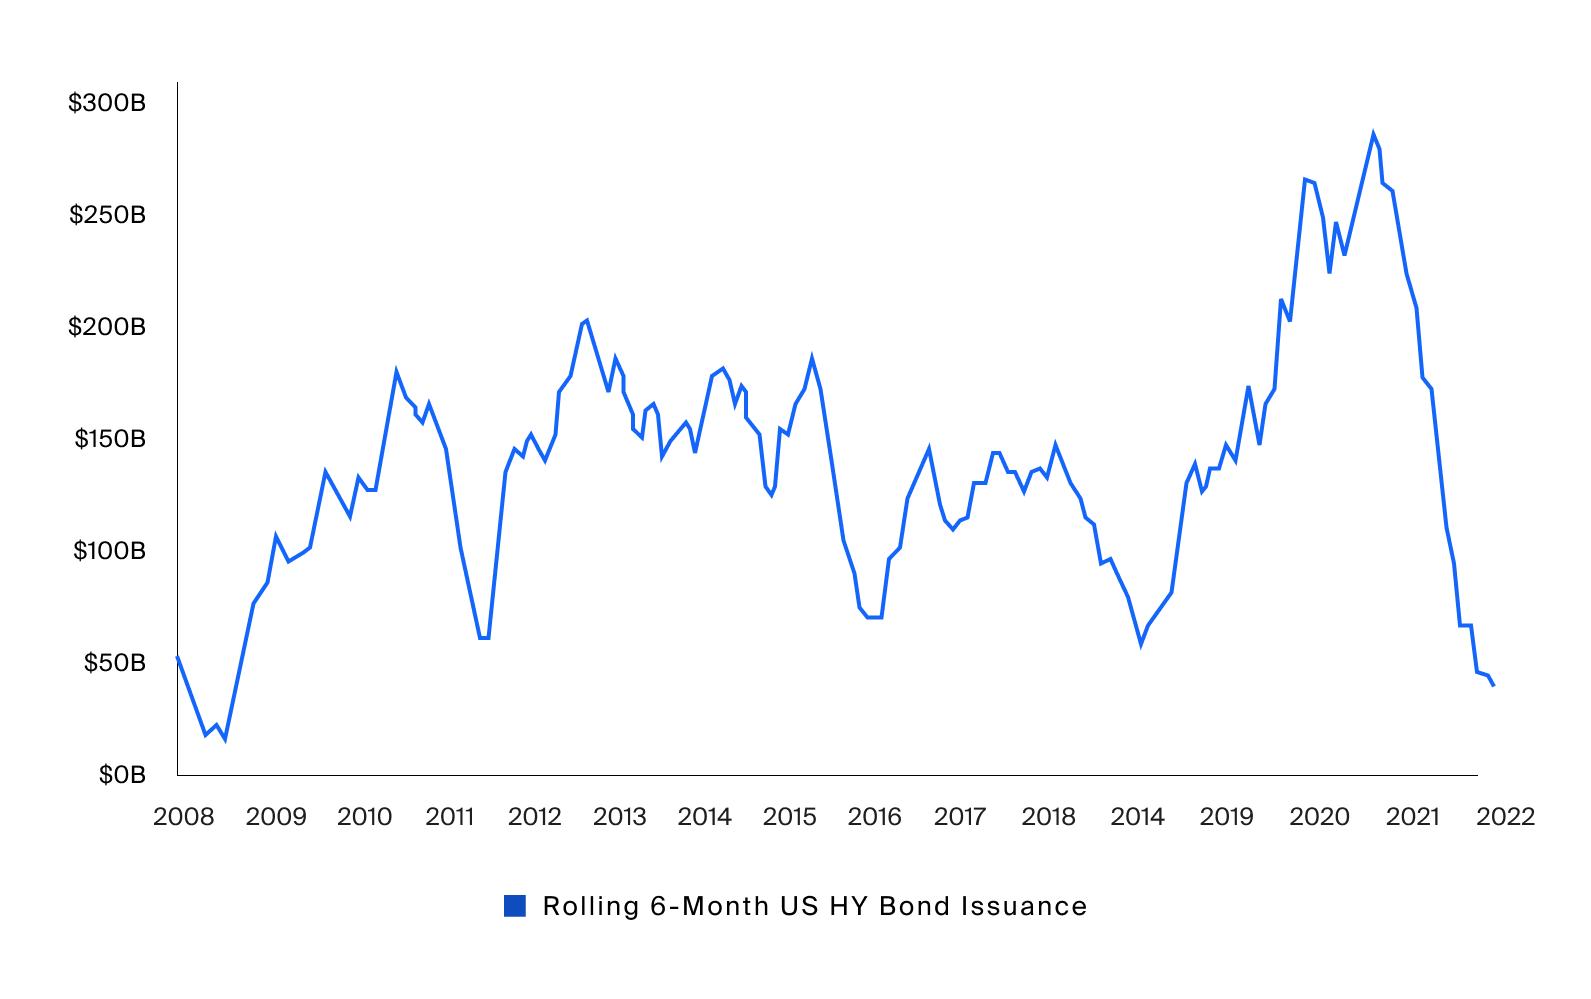 U.S. high-yield bond issuance declined as interest rates increased since start of year– a potential challenge for companies seeking to refinance